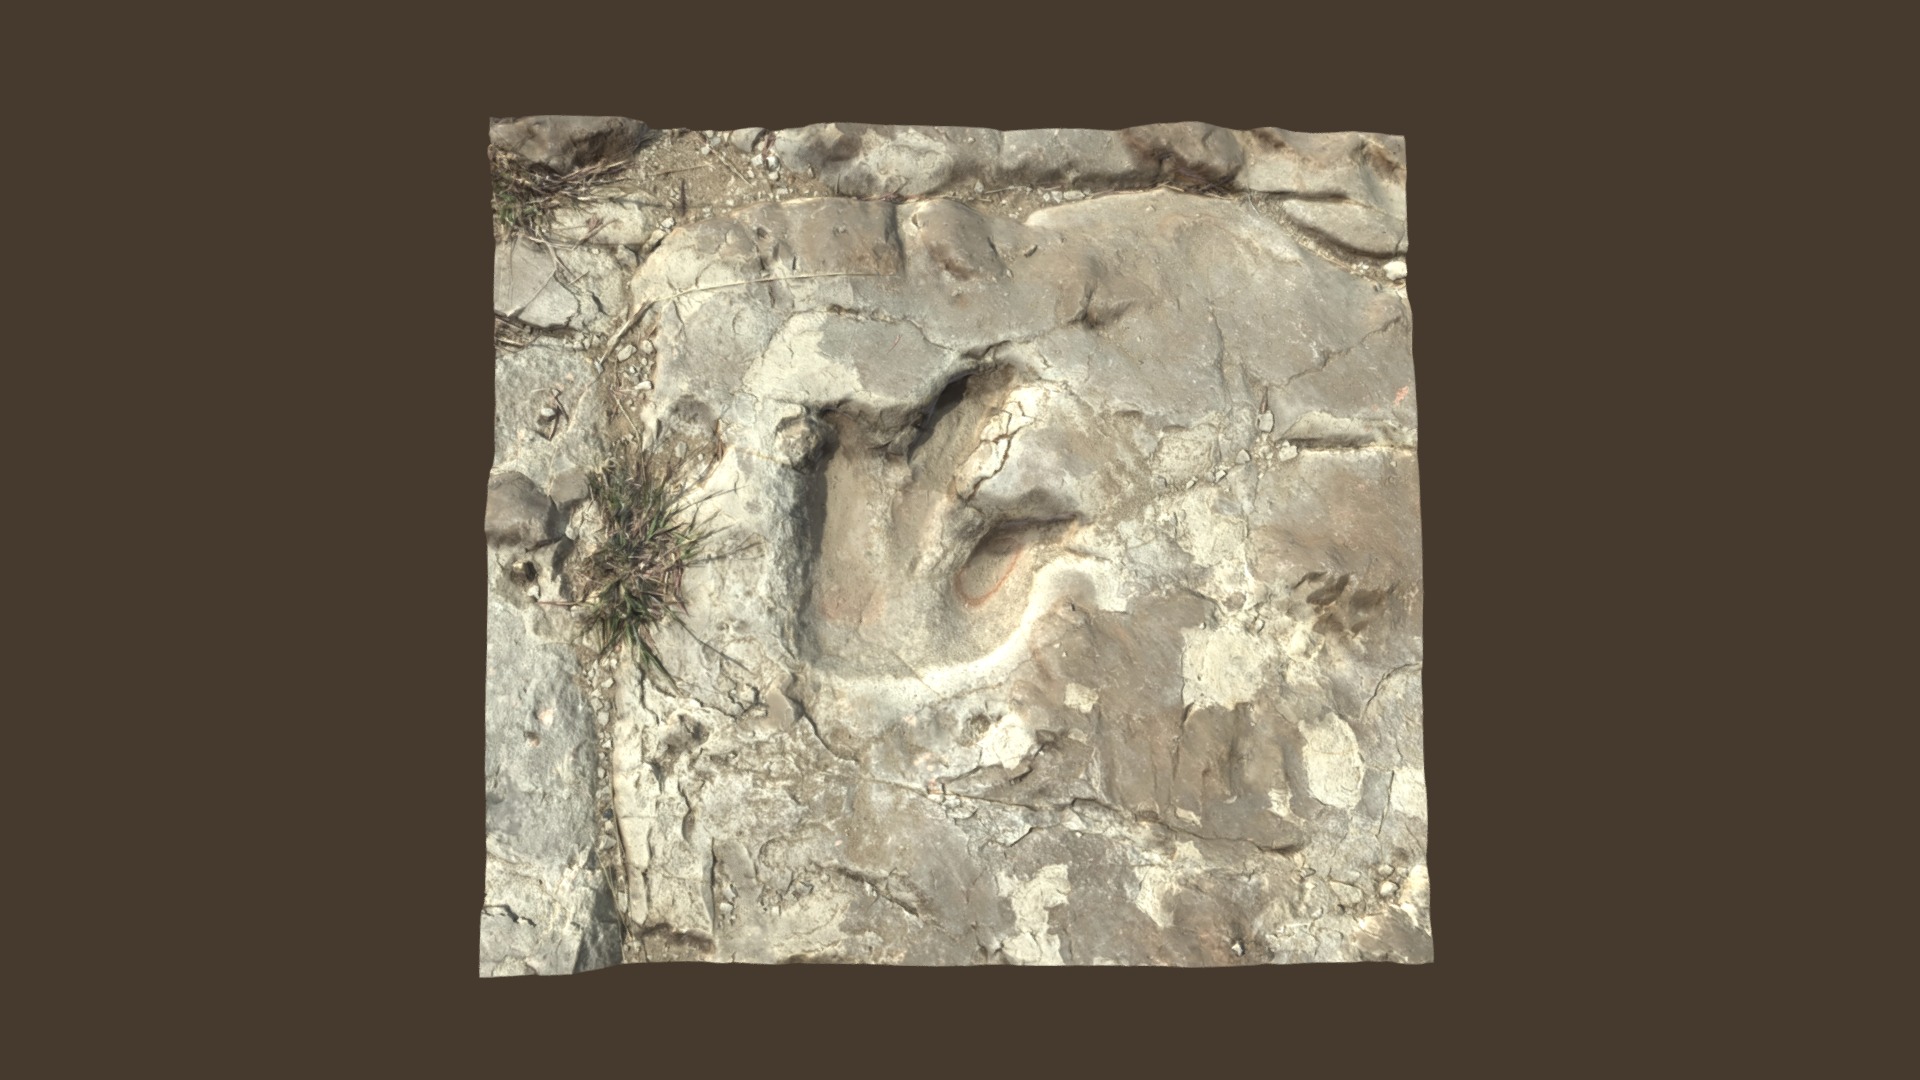 3D model Track 1 – Picketwire, CO - This is a 3D model of the Track 1 - Picketwire, CO. The 3D model is about a stone carving of a person.